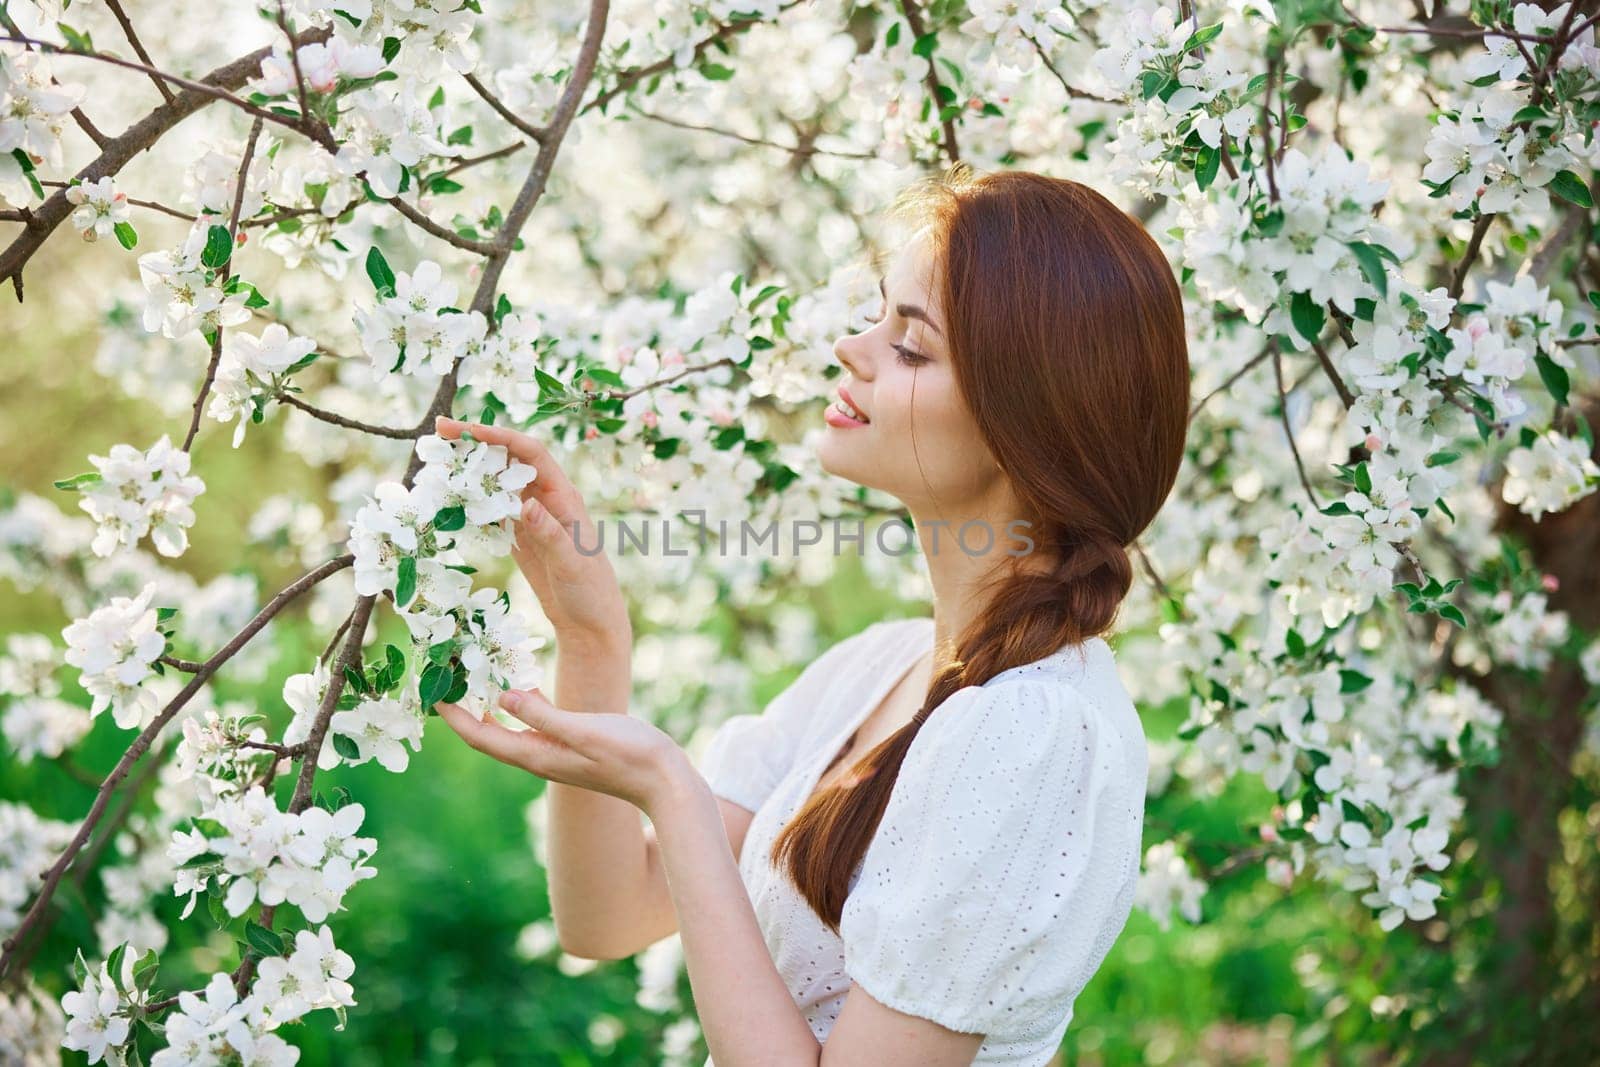 beautiful, cute woman touching flowers on a tree in the garden by Vichizh